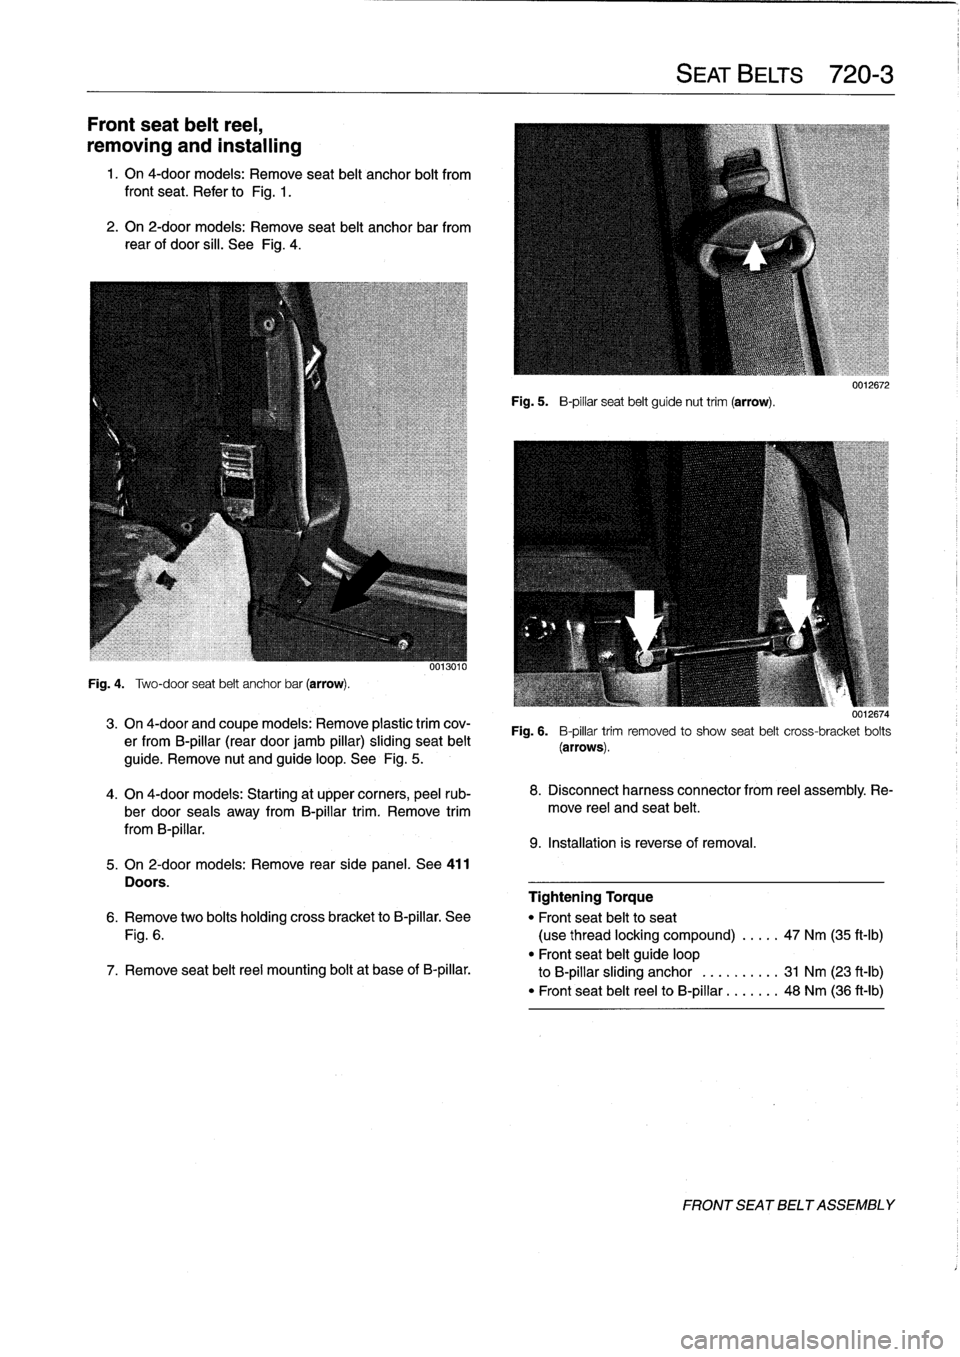 BMW 318i 1997 E36 Owners Guide 
Front
seat
belt
reel,

removing
and
installing

1
.
On
4-door
models
:
Remove
seat
belt
anchor
bolt
from
front
seat
.
Refer
to
Fig
.
1
.

2
.
On
2-door
models
:
Remove
seat
belt
anchorbar
from
rear
o